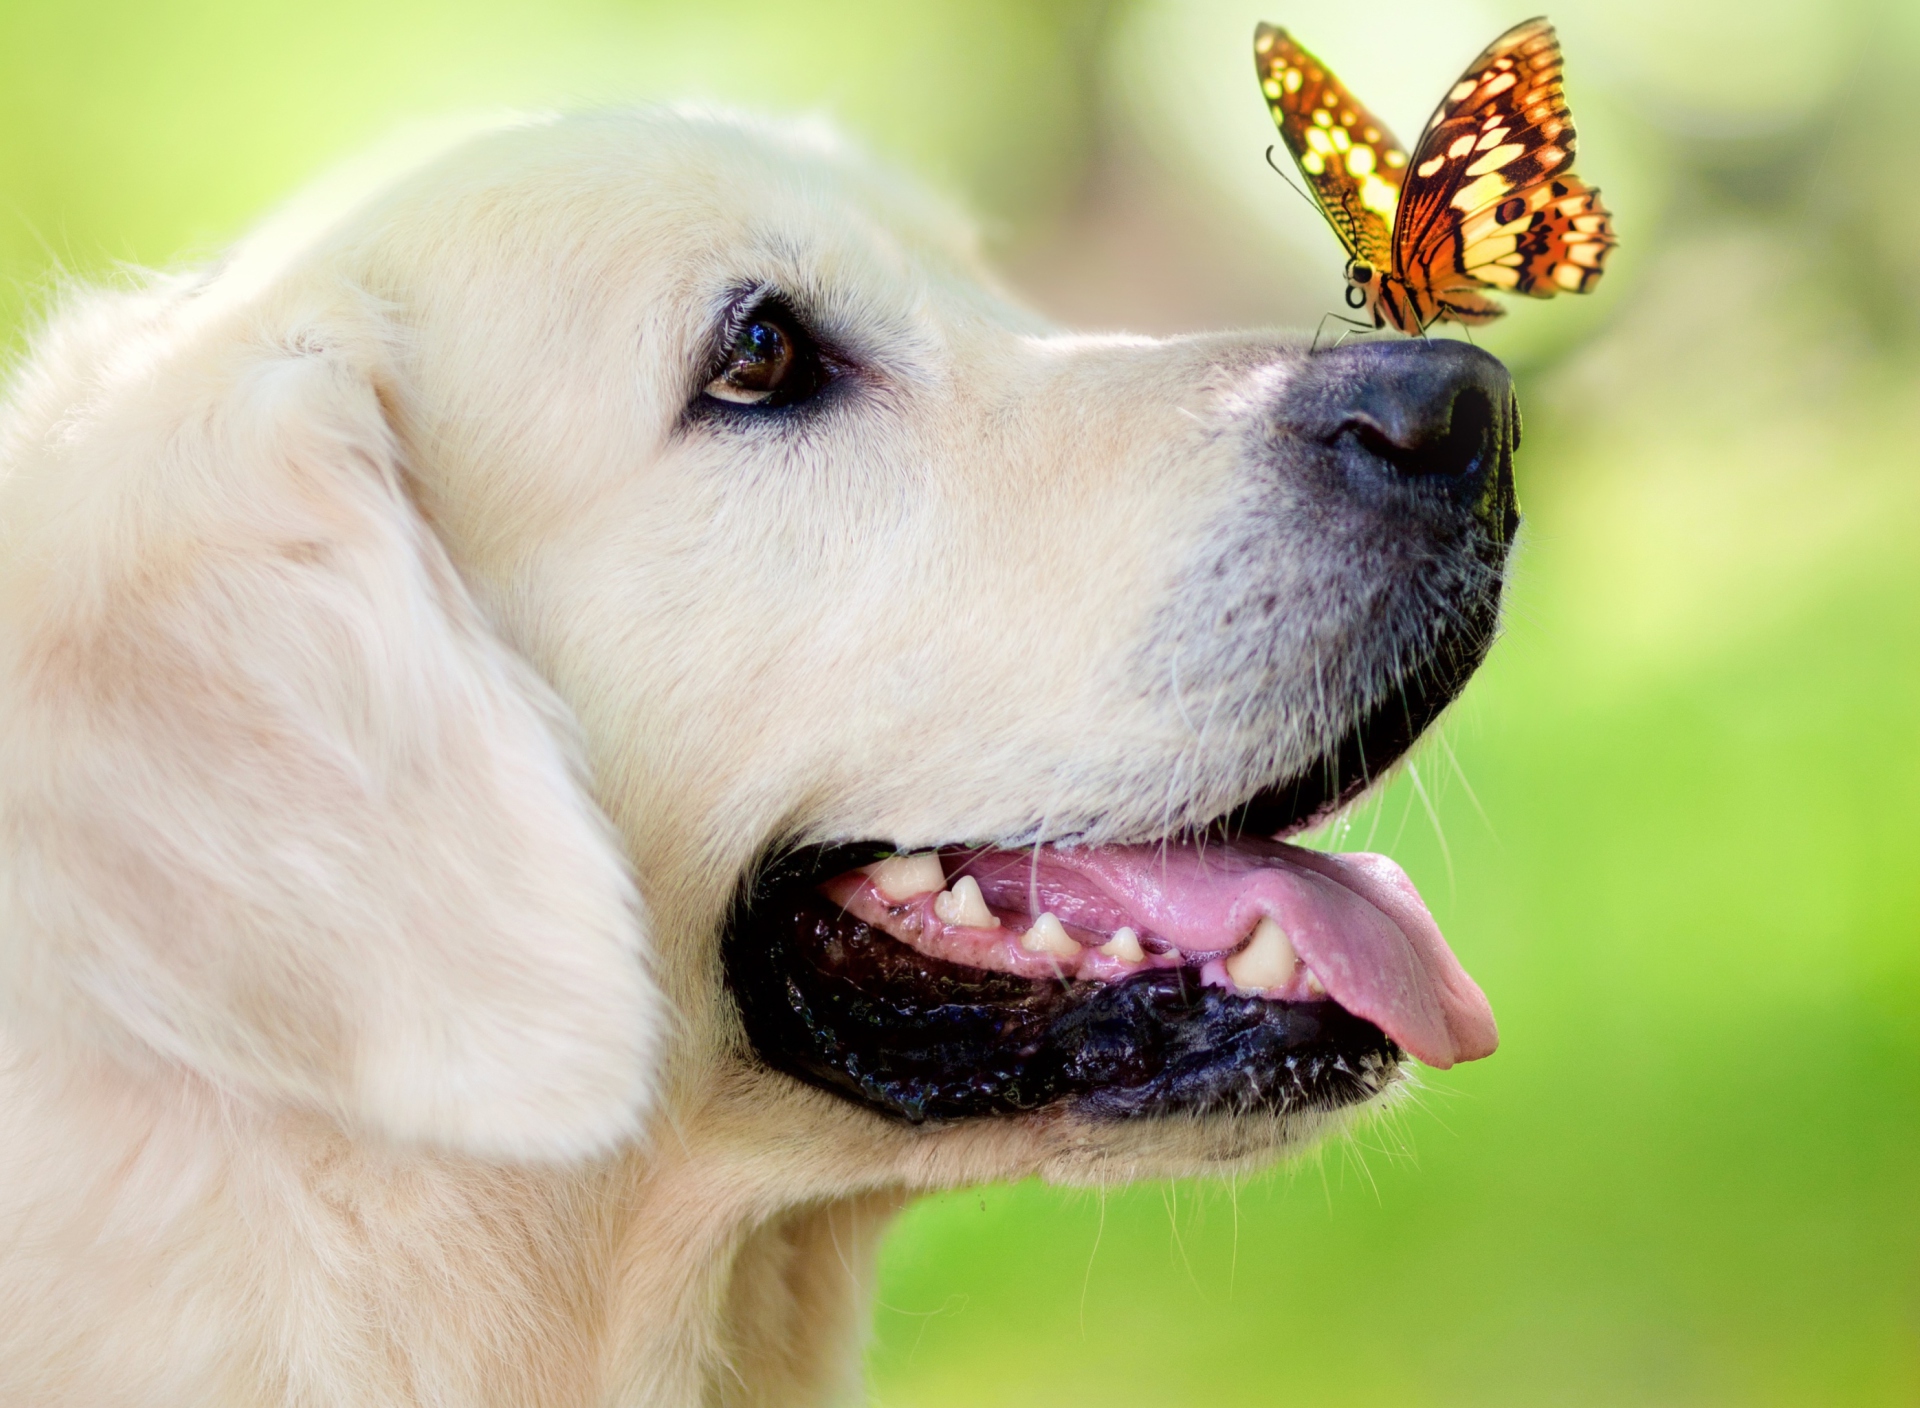 Butterfly On Dog's Nose wallpaper 1920x1408